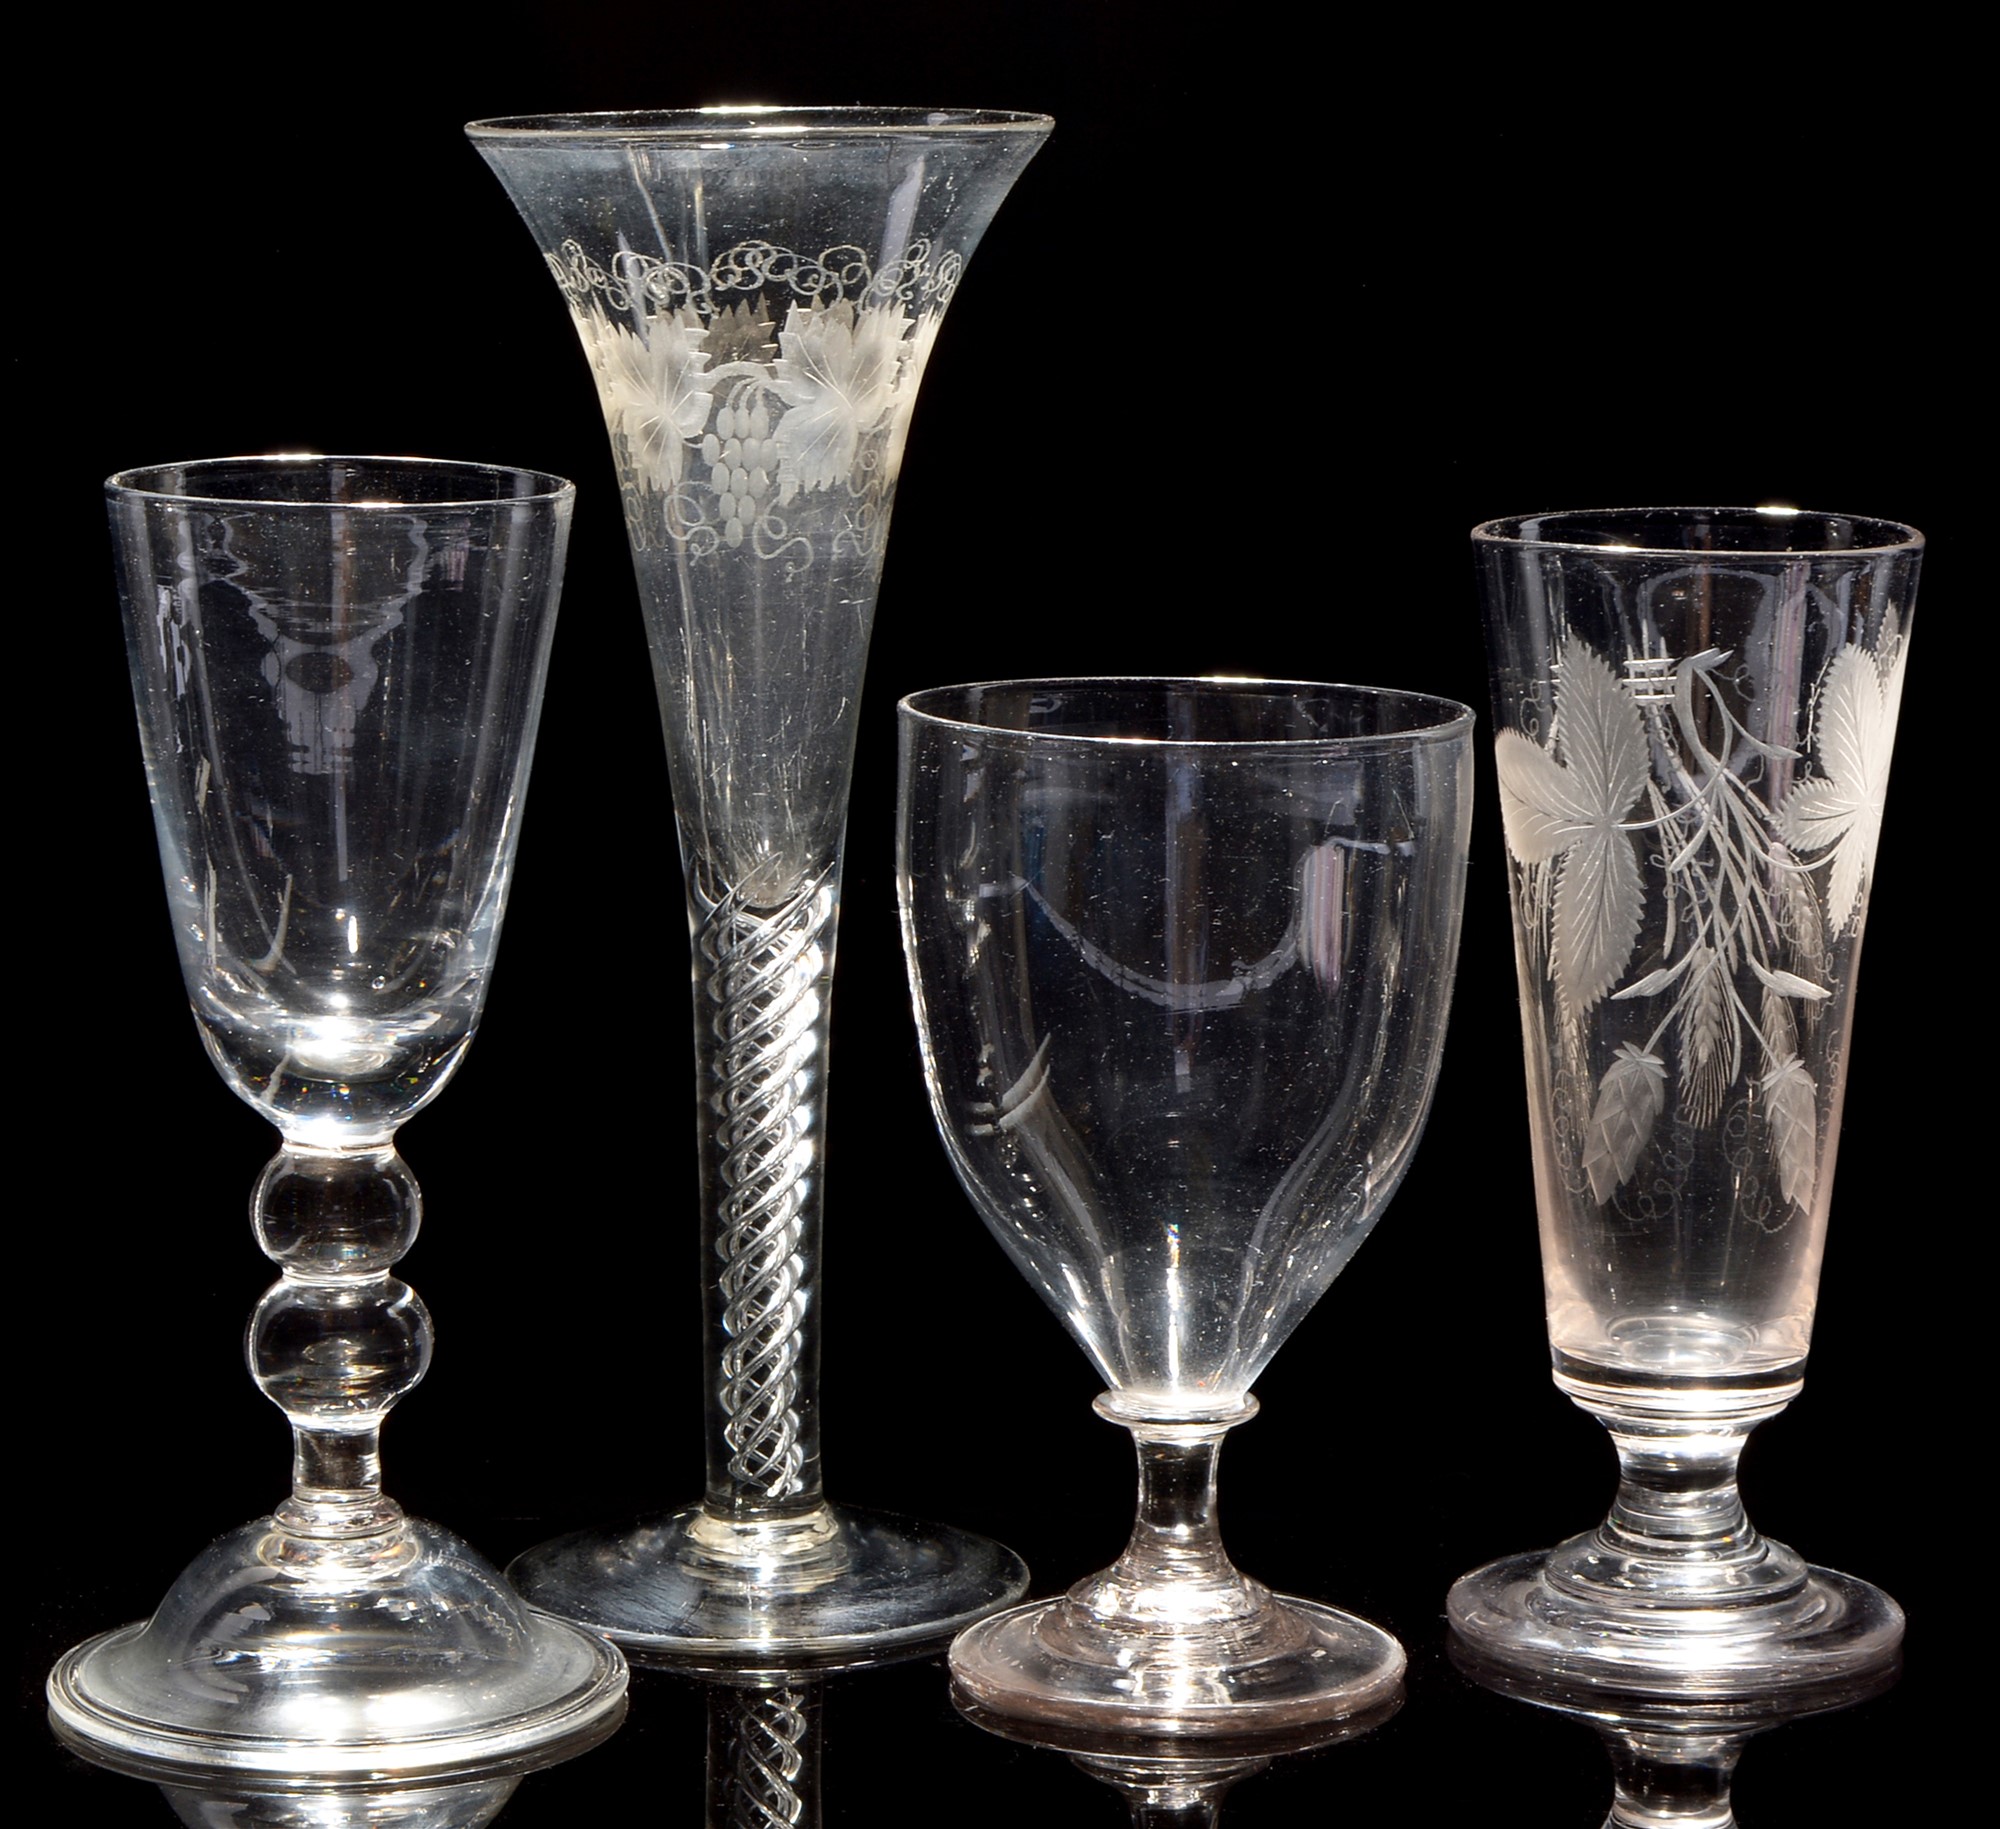 An ale glass; and three goblets.